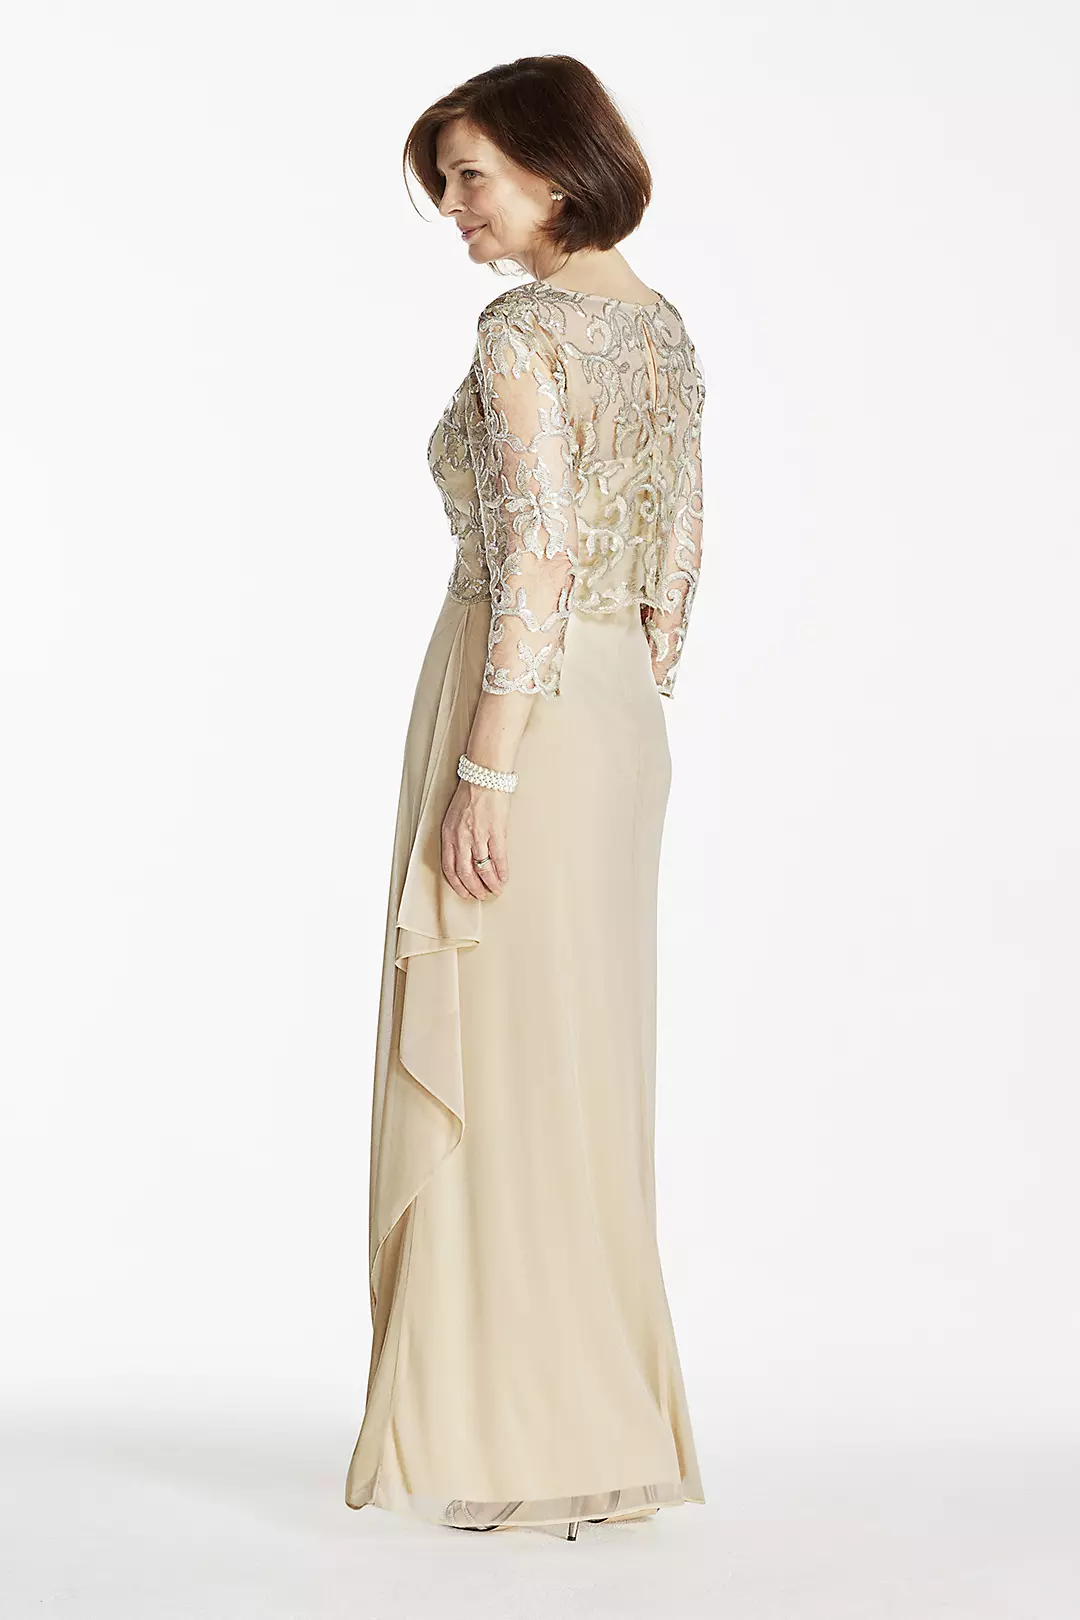 Long Mesh Dress with 3/4 Sleeve Lace Pop Over Image 2